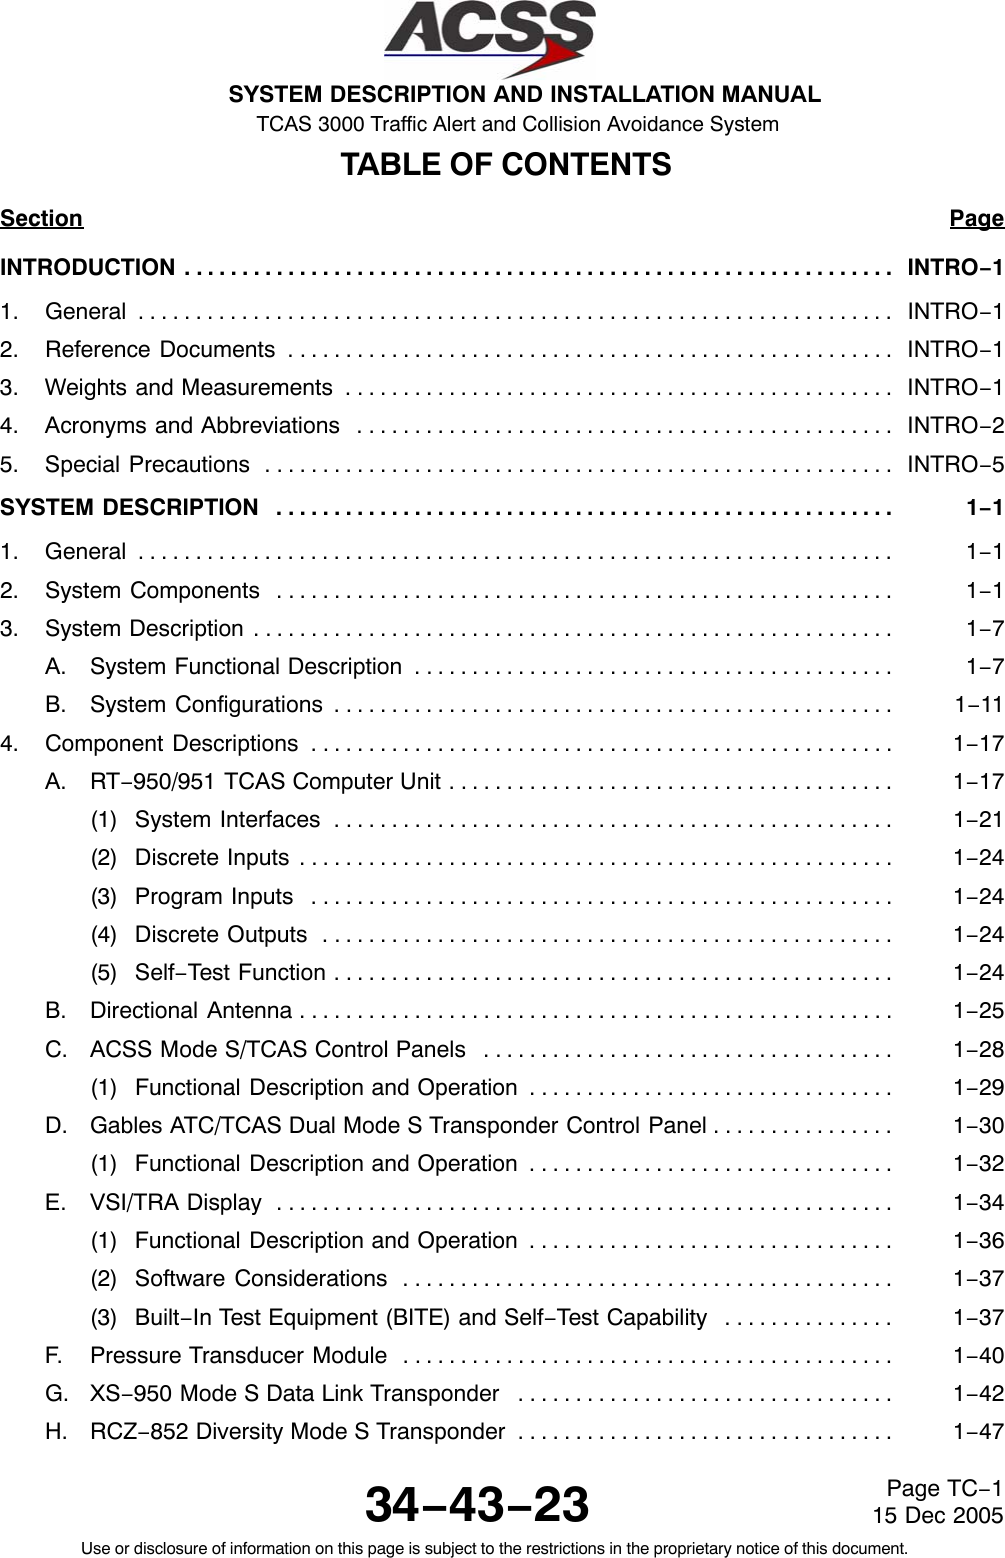 SYSTEM DESCRIPTION AND INSTALLATION MANUAL TCAS 3000 Traffic Alert and Collision Avoidance System34−43−23Use or disclosure of information on this page is subject to the restrictions in the proprietary notice of this document.Page TC−115 Dec 2005TABLE OF CONTENTSSection PageINTRODUCTION INTRO−1. . . . . . . . . . . . . . . . . . . . . . . . . . . . . . . . . . . . . . . . . . . . . . . . . . . . . . . . . . . . . . 1. General INTRO−1. . . . . . . . . . . . . . . . . . . . . . . . . . . . . . . . . . . . . . . . . . . . . . . . . . . . . . . . . . . . . . . . . . 2. Reference Documents INTRO−1. . . . . . . . . . . . . . . . . . . . . . . . . . . . . . . . . . . . . . . . . . . . . . . . . . . . . 3. Weights and Measurements INTRO−1. . . . . . . . . . . . . . . . . . . . . . . . . . . . . . . . . . . . . . . . . . . . . . . . 4. Acronyms and Abbreviations INTRO−2. . . . . . . . . . . . . . . . . . . . . . . . . . . . . . . . . . . . . . . . . . . . . . . 5. Special Precautions INTRO−5. . . . . . . . . . . . . . . . . . . . . . . . . . . . . . . . . . . . . . . . . . . . . . . . . . . . . . . SYSTEM DESCRIPTION 1−1. . . . . . . . . . . . . . . . . . . . . . . . . . . . . . . . . . . . . . . . . . . . . . . . . . . . . . 1. General 1−1. . . . . . . . . . . . . . . . . . . . . . . . . . . . . . . . . . . . . . . . . . . . . . . . . . . . . . . . . . . . . . . . . . 2. System Components 1−1. . . . . . . . . . . . . . . . . . . . . . . . . . . . . . . . . . . . . . . . . . . . . . . . . . . . . . 3. System Description 1−7. . . . . . . . . . . . . . . . . . . . . . . . . . . . . . . . . . . . . . . . . . . . . . . . . . . . . . . . A. System Functional Description 1−7. . . . . . . . . . . . . . . . . . . . . . . . . . . . . . . . . . . . . . . . . . B. System Configurations 1−11. . . . . . . . . . . . . . . . . . . . . . . . . . . . . . . . . . . . . . . . . . . . . . . . . 4. Component Descriptions 1−17. . . . . . . . . . . . . . . . . . . . . . . . . . . . . . . . . . . . . . . . . . . . . . . . . . . A. RT−950/951 TCAS Computer Unit 1−17. . . . . . . . . . . . . . . . . . . . . . . . . . . . . . . . . . . . . . . (1) System Interfaces 1−21. . . . . . . . . . . . . . . . . . . . . . . . . . . . . . . . . . . . . . . . . . . . . . . . . (2) Discrete Inputs 1−24. . . . . . . . . . . . . . . . . . . . . . . . . . . . . . . . . . . . . . . . . . . . . . . . . . . . (3) Program Inputs 1−24. . . . . . . . . . . . . . . . . . . . . . . . . . . . . . . . . . . . . . . . . . . . . . . . . . . (4) Discrete Outputs 1−24. . . . . . . . . . . . . . . . . . . . . . . . . . . . . . . . . . . . . . . . . . . . . . . . . . (5) Self−Test Function 1−24. . . . . . . . . . . . . . . . . . . . . . . . . . . . . . . . . . . . . . . . . . . . . . . . . B. Directional Antenna 1−25. . . . . . . . . . . . . . . . . . . . . . . . . . . . . . . . . . . . . . . . . . . . . . . . . . . . C. ACSS Mode S/TCAS Control Panels 1−28. . . . . . . . . . . . . . . . . . . . . . . . . . . . . . . . . . . . (1) Functional Description and Operation 1−29. . . . . . . . . . . . . . . . . . . . . . . . . . . . . . . . D. Gables ATC/TCAS Dual Mode S Transponder Control Panel 1−30. . . . . . . . . . . . . . . . (1) Functional Description and Operation 1−32. . . . . . . . . . . . . . . . . . . . . . . . . . . . . . . . E. VSI/TRA Display 1−34. . . . . . . . . . . . . . . . . . . . . . . . . . . . . . . . . . . . . . . . . . . . . . . . . . . . . . (1) Functional Description and Operation 1−36. . . . . . . . . . . . . . . . . . . . . . . . . . . . . . . . (2) Software Considerations 1−37. . . . . . . . . . . . . . . . . . . . . . . . . . . . . . . . . . . . . . . . . . . (3) Built−In Test Equipment (BITE) and Self−Test Capability 1−37. . . . . . . . . . . . . . . F. Pressure Transducer Module 1−40. . . . . . . . . . . . . . . . . . . . . . . . . . . . . . . . . . . . . . . . . . . G. XS−950 Mode S Data Link Transponder 1−42. . . . . . . . . . . . . . . . . . . . . . . . . . . . . . . . . H. RCZ−852 Diversity Mode S Transponder 1−47. . . . . . . . . . . . . . . . . . . . . . . . . . . . . . . . . 